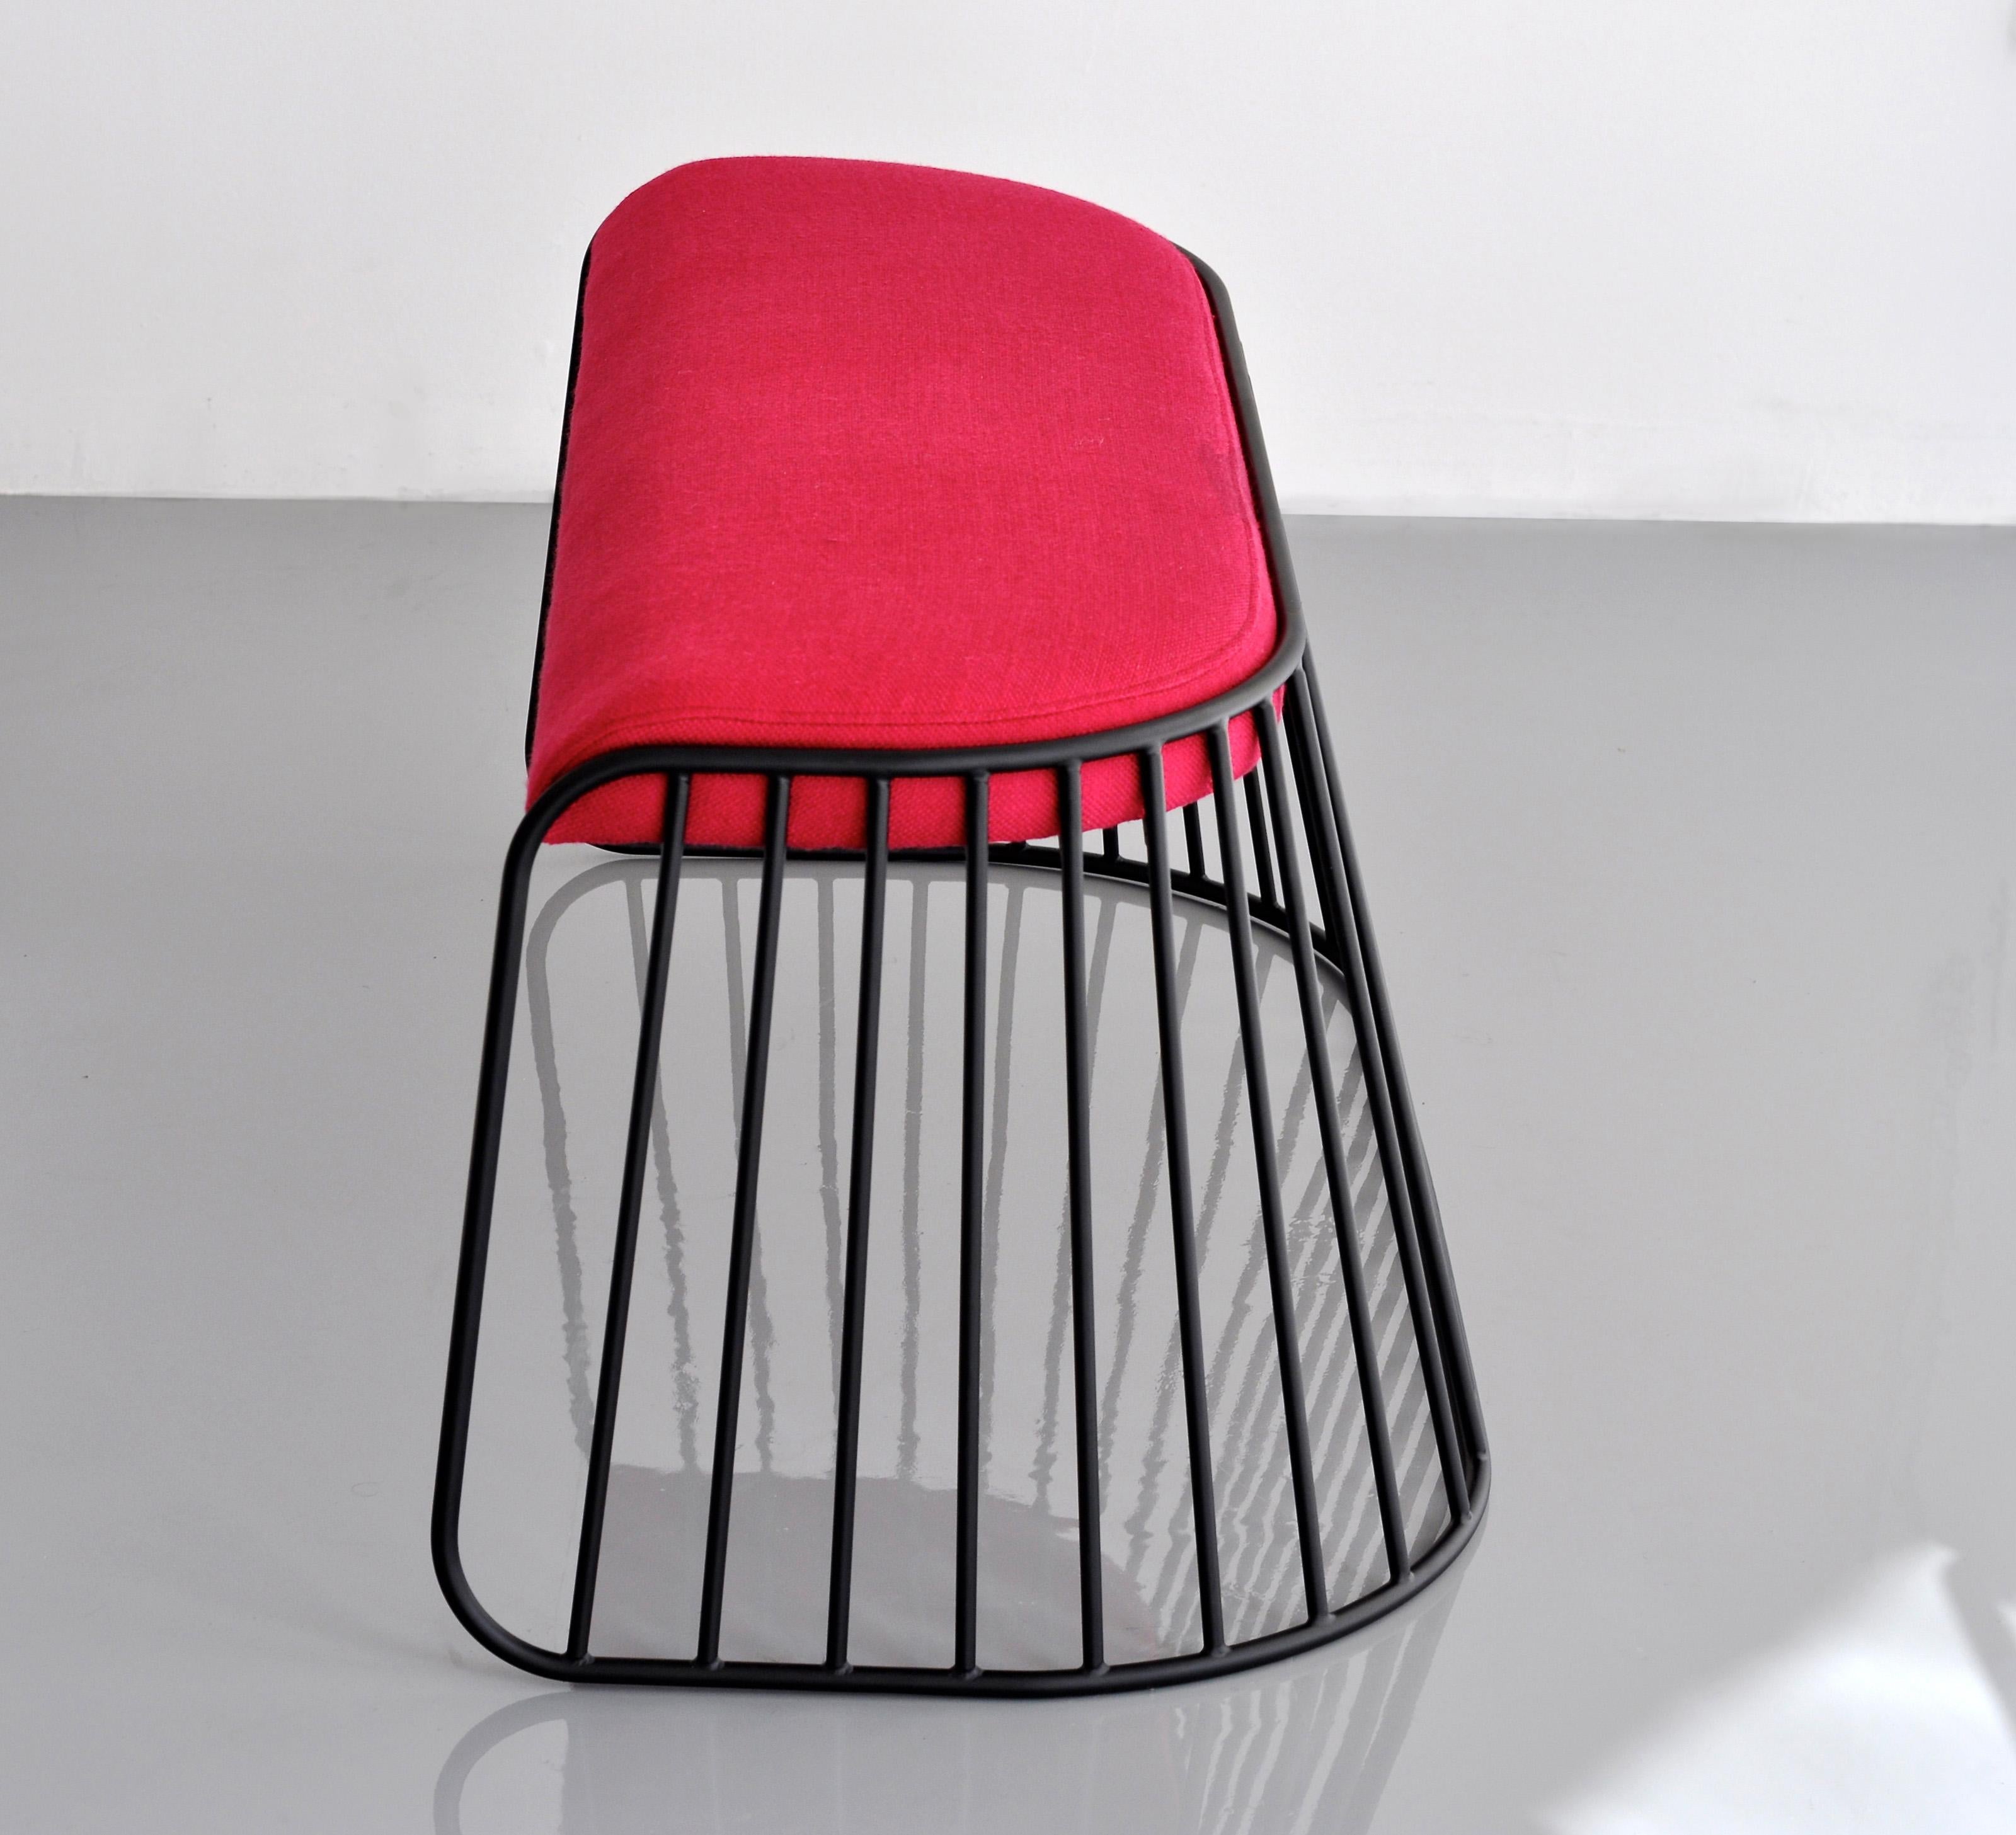 Bride’s Veil Double Low Stool by Phase Design
Dimensions: D 52,1 x W 109,2 x H 45,7 cm.
Materials: Upholstery and powder-coated steel.

Solid steel bar available in a smoked brass, polished chrome, burnt copper, or powder coat finish with